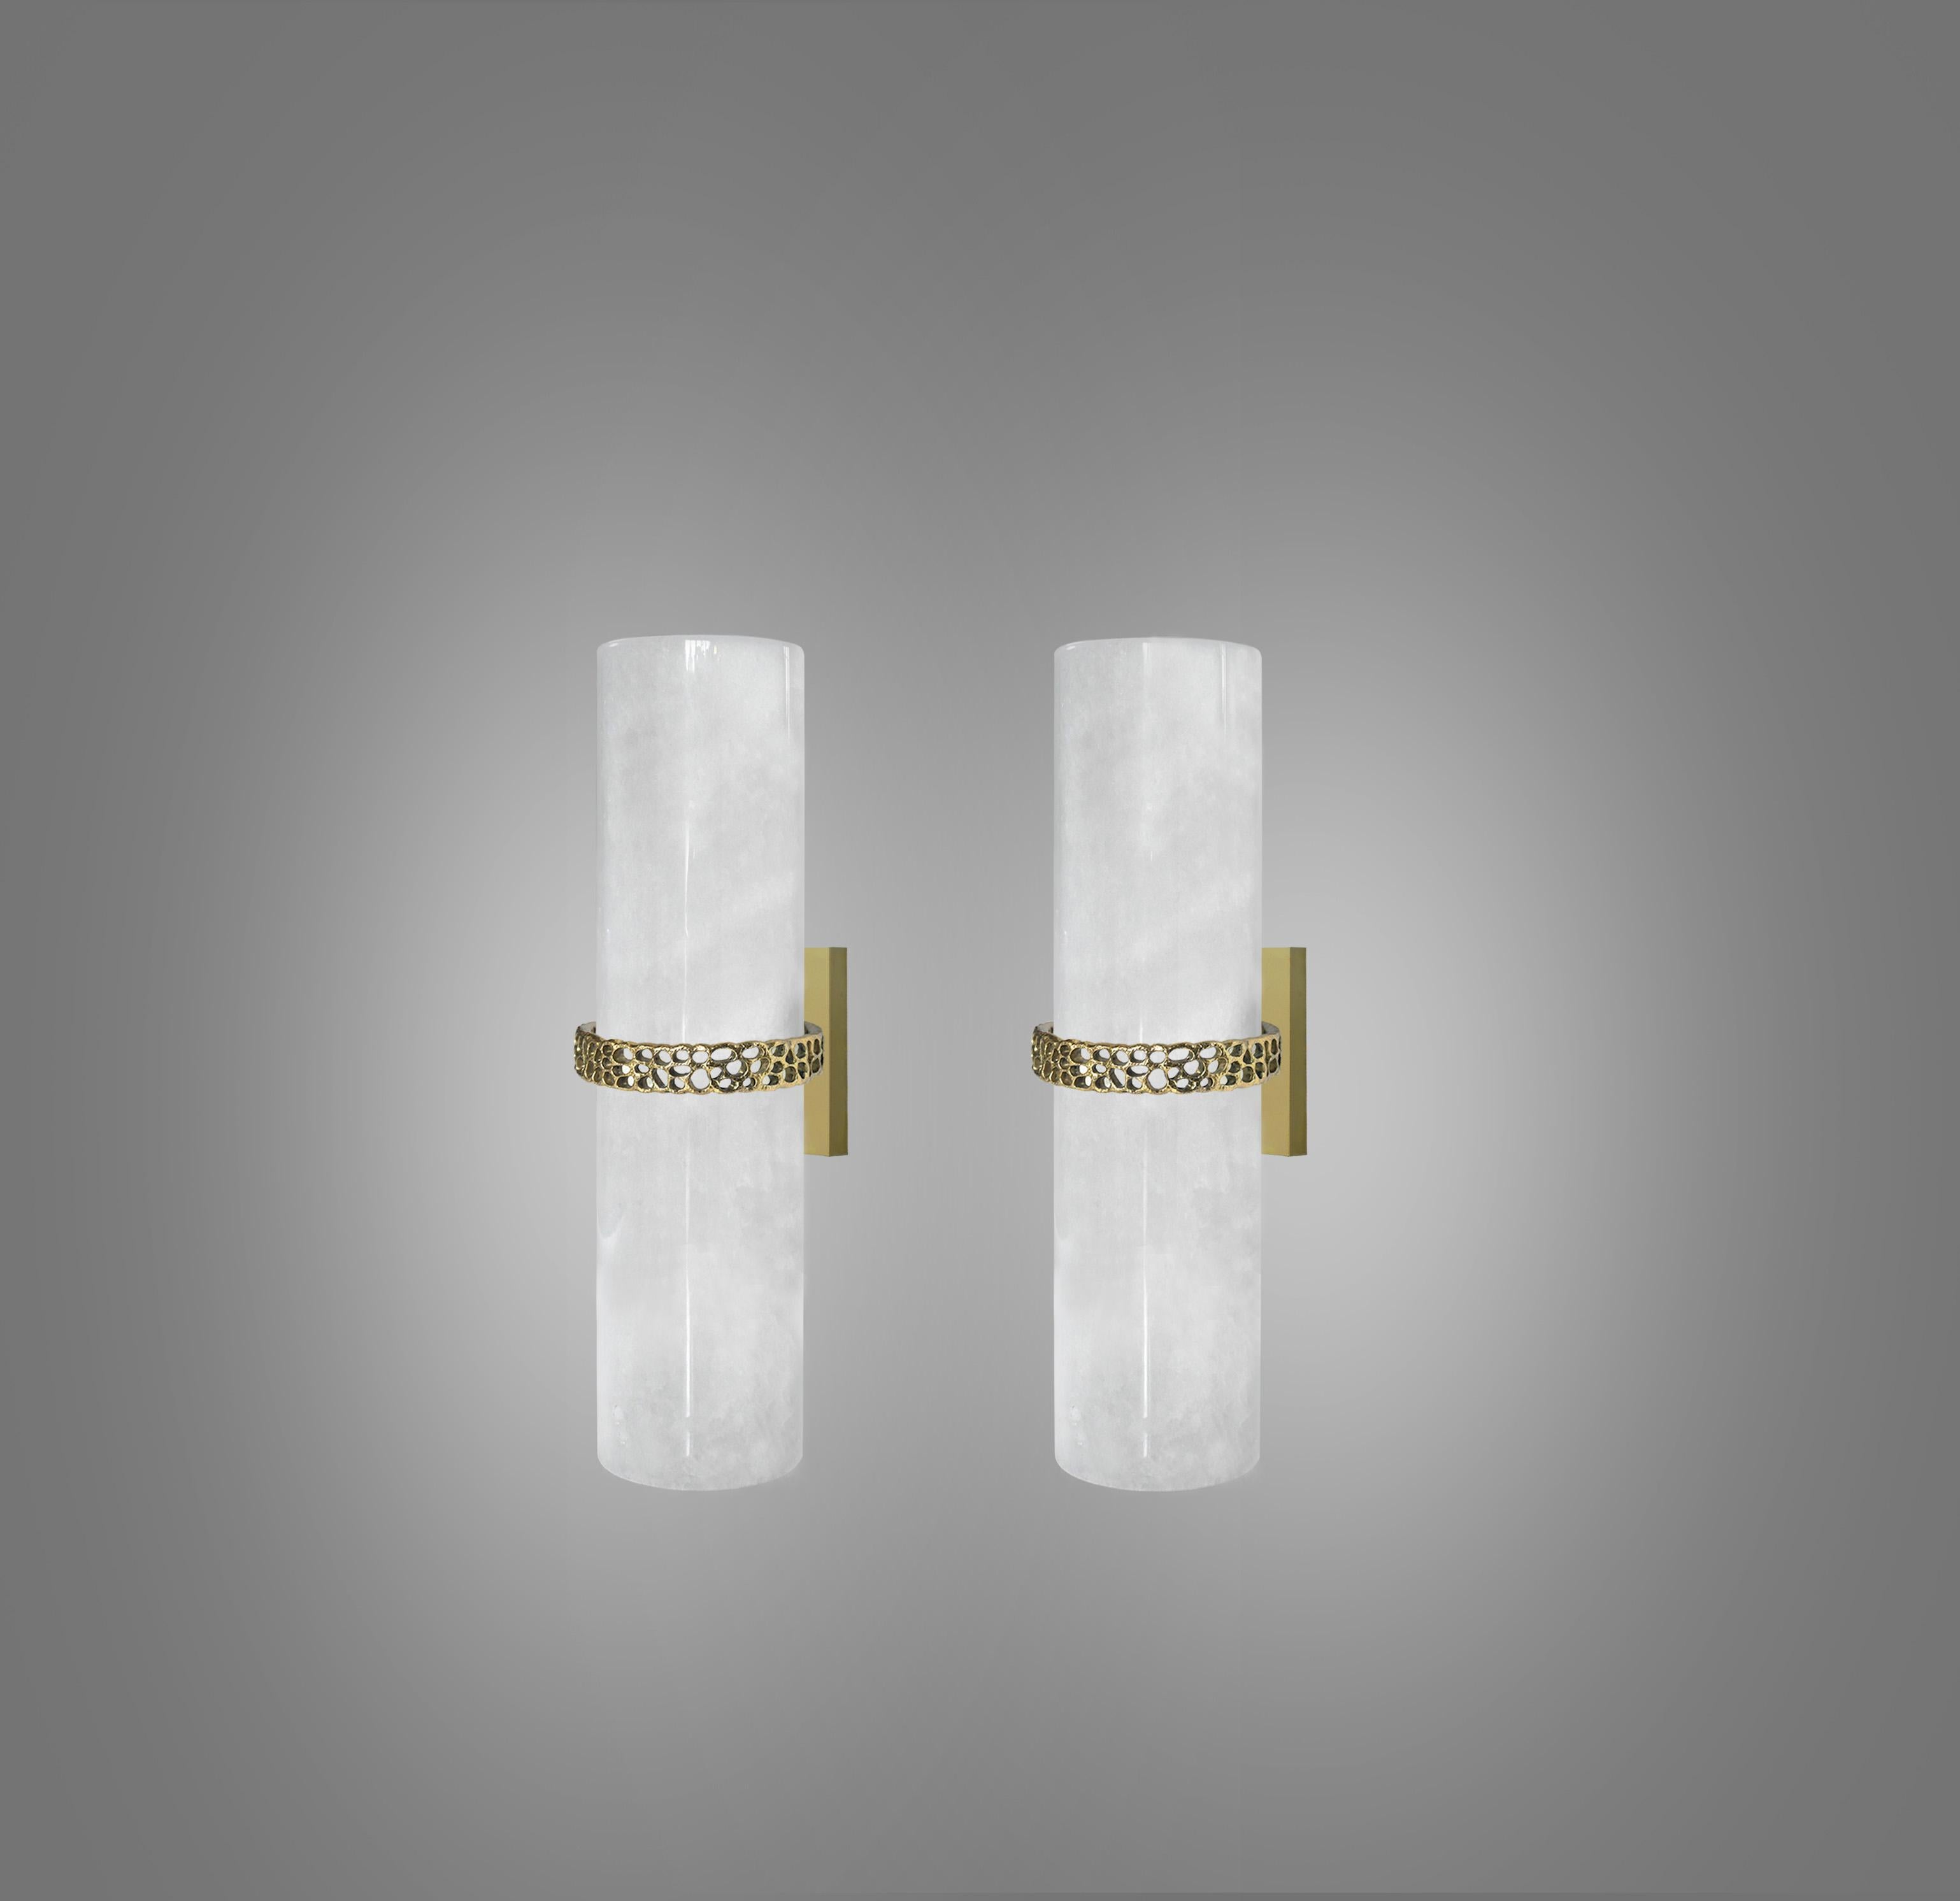 Cylindrical rock crystal sconces with designed hammered brass detail decoration. Created Phoenix Gallery, NYC.
Each wall sconce is installed with two E26 sockets, 80watts max each socket, a total of 160-watt maximum.
Custom size, quantity, and